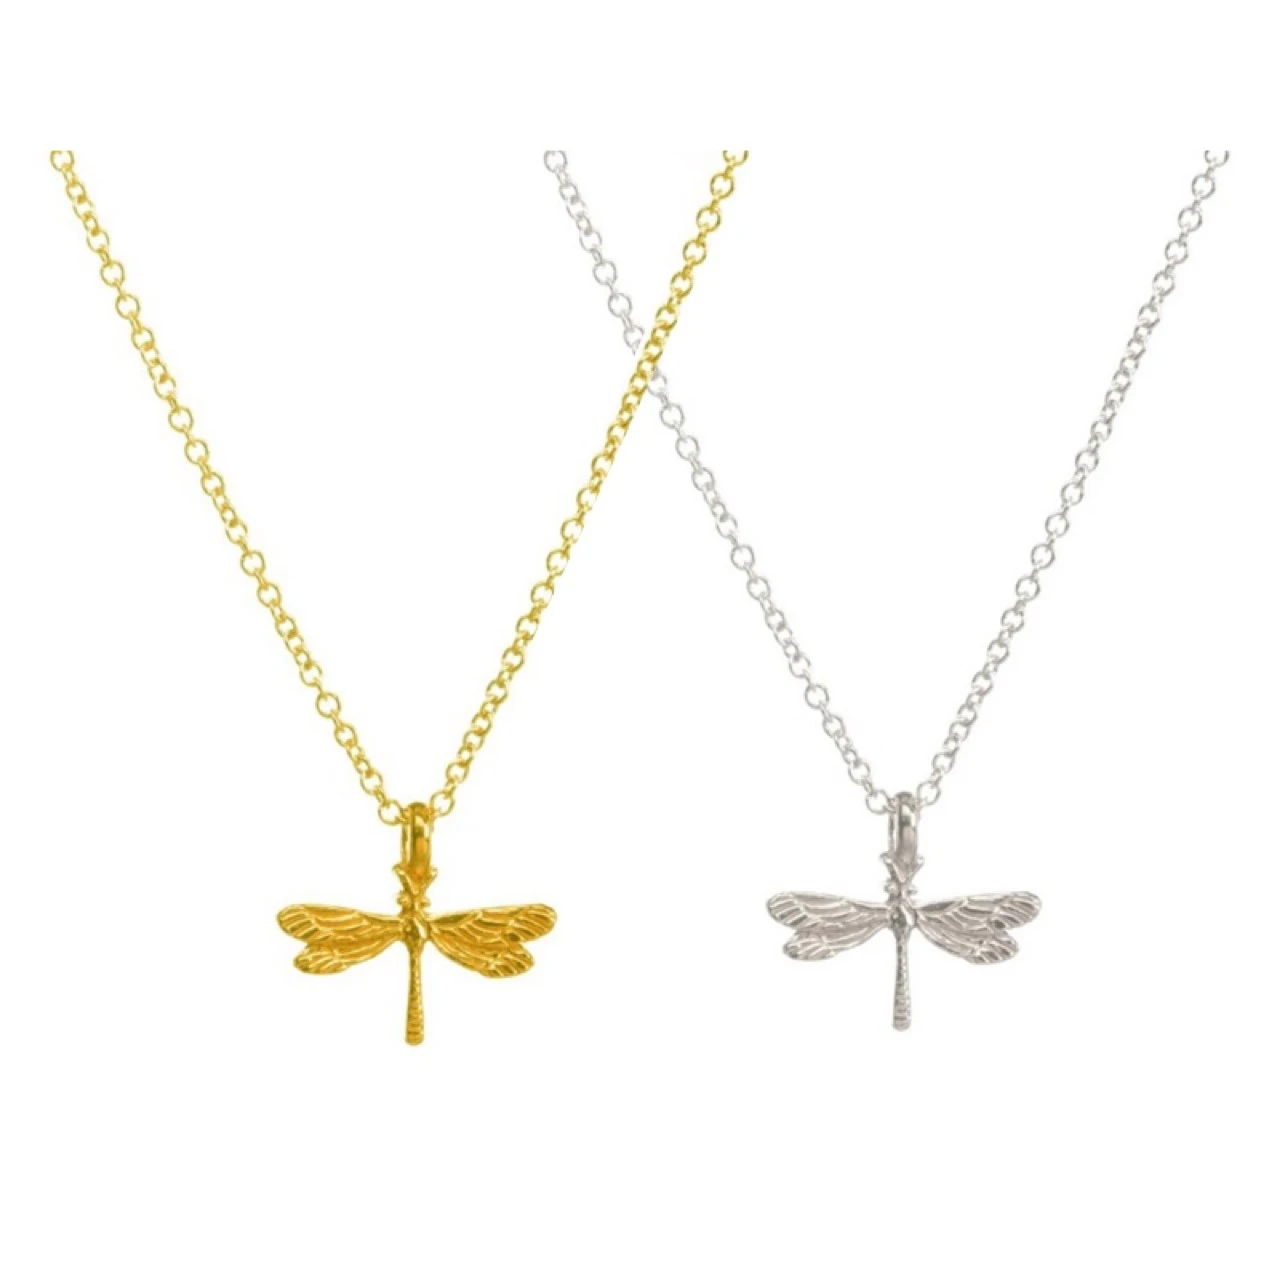 Newest Arrival Gold Plated Dragonfly Pendant Necklaces Cute Bird Animal Choker Necklace